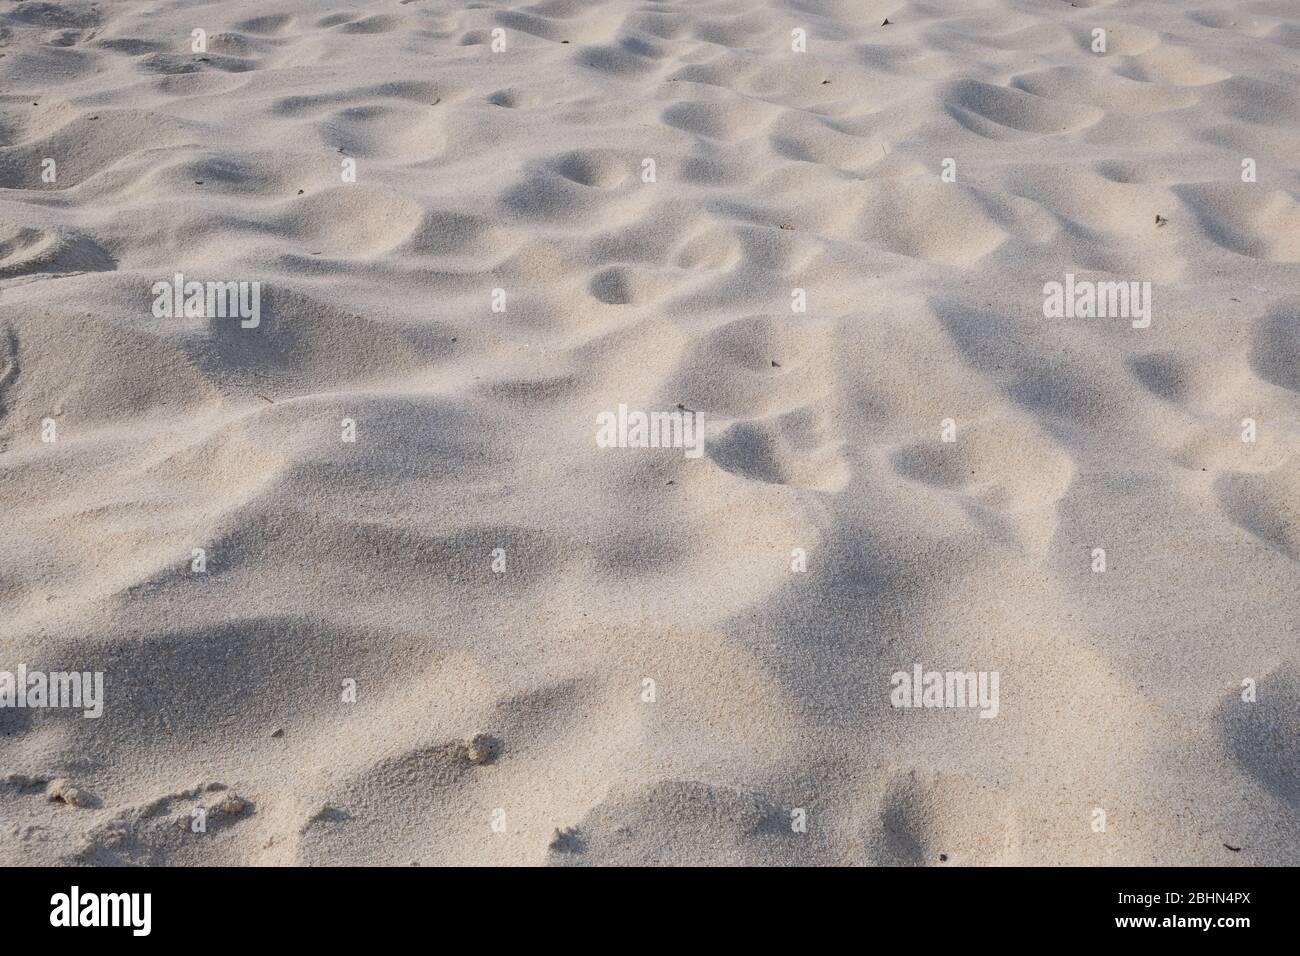 Section of sandy beach in closeup. Stock Photo